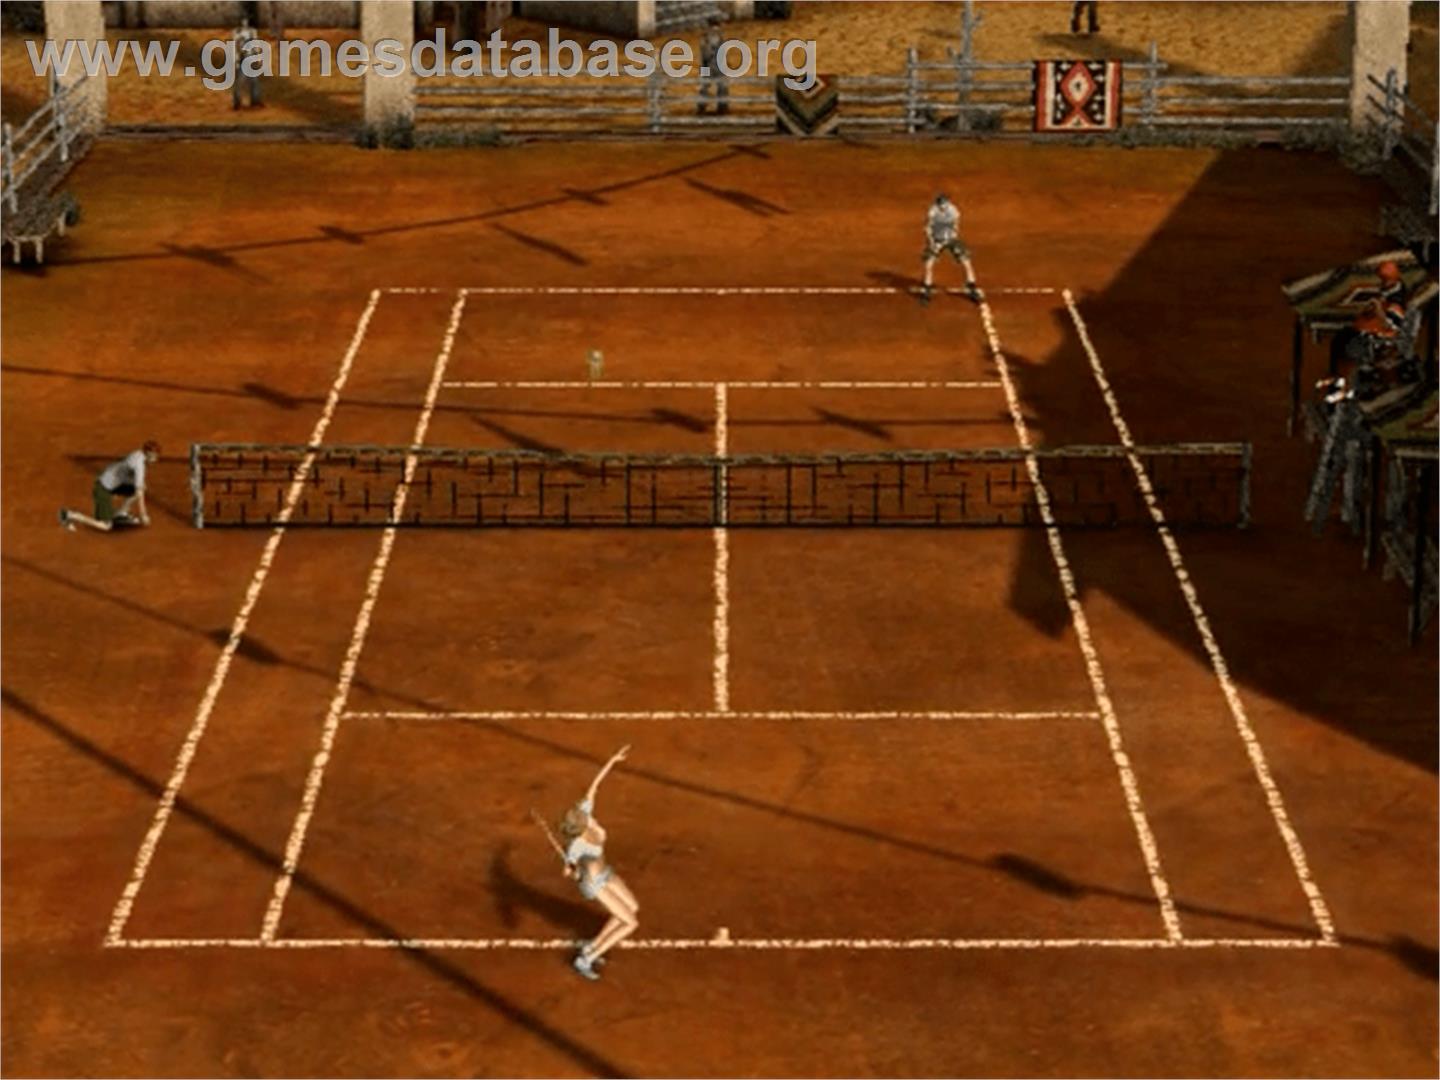 Outlaw Tennis - Sony Playstation 2 - Artwork - In Game